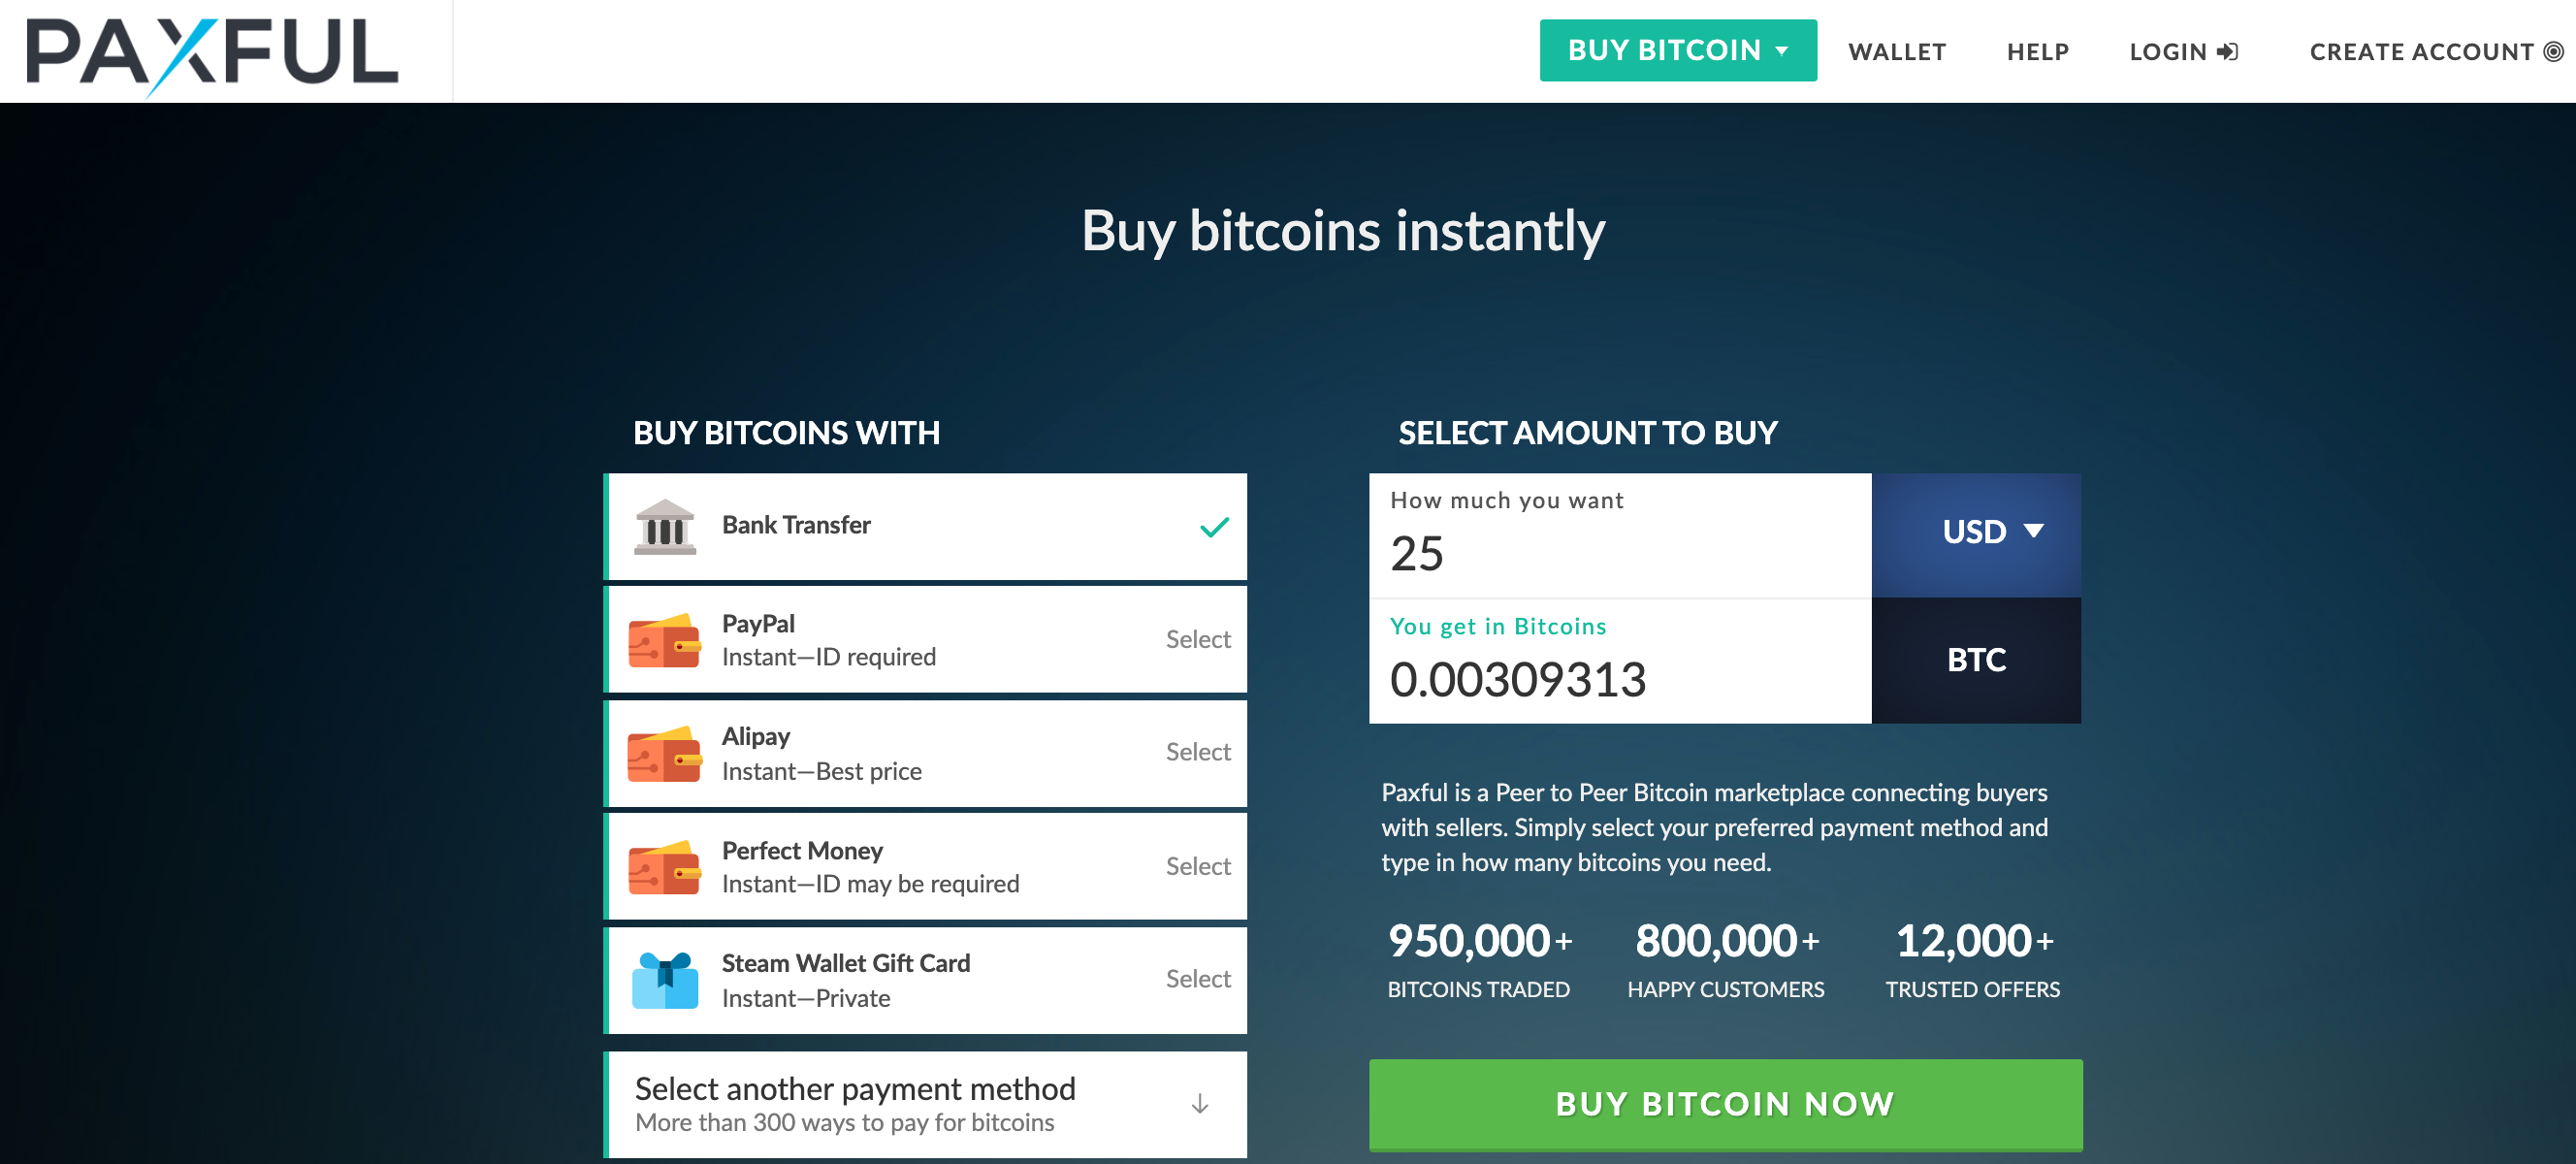 best place to buy bitcoin instantly